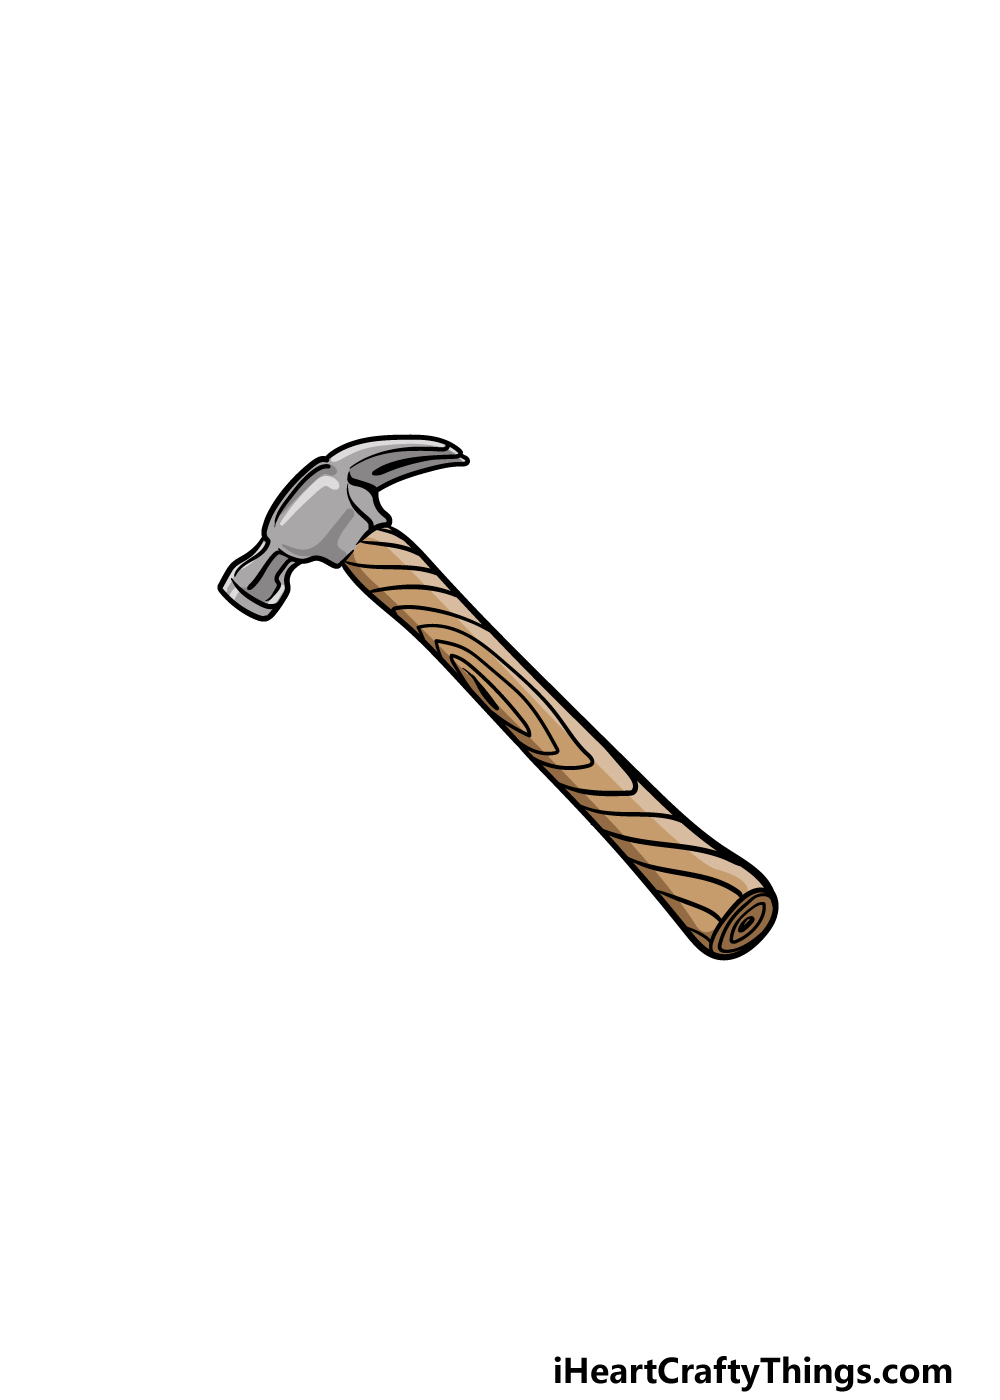 Hammer and Saw Coloring Page | Easy Drawing Guides